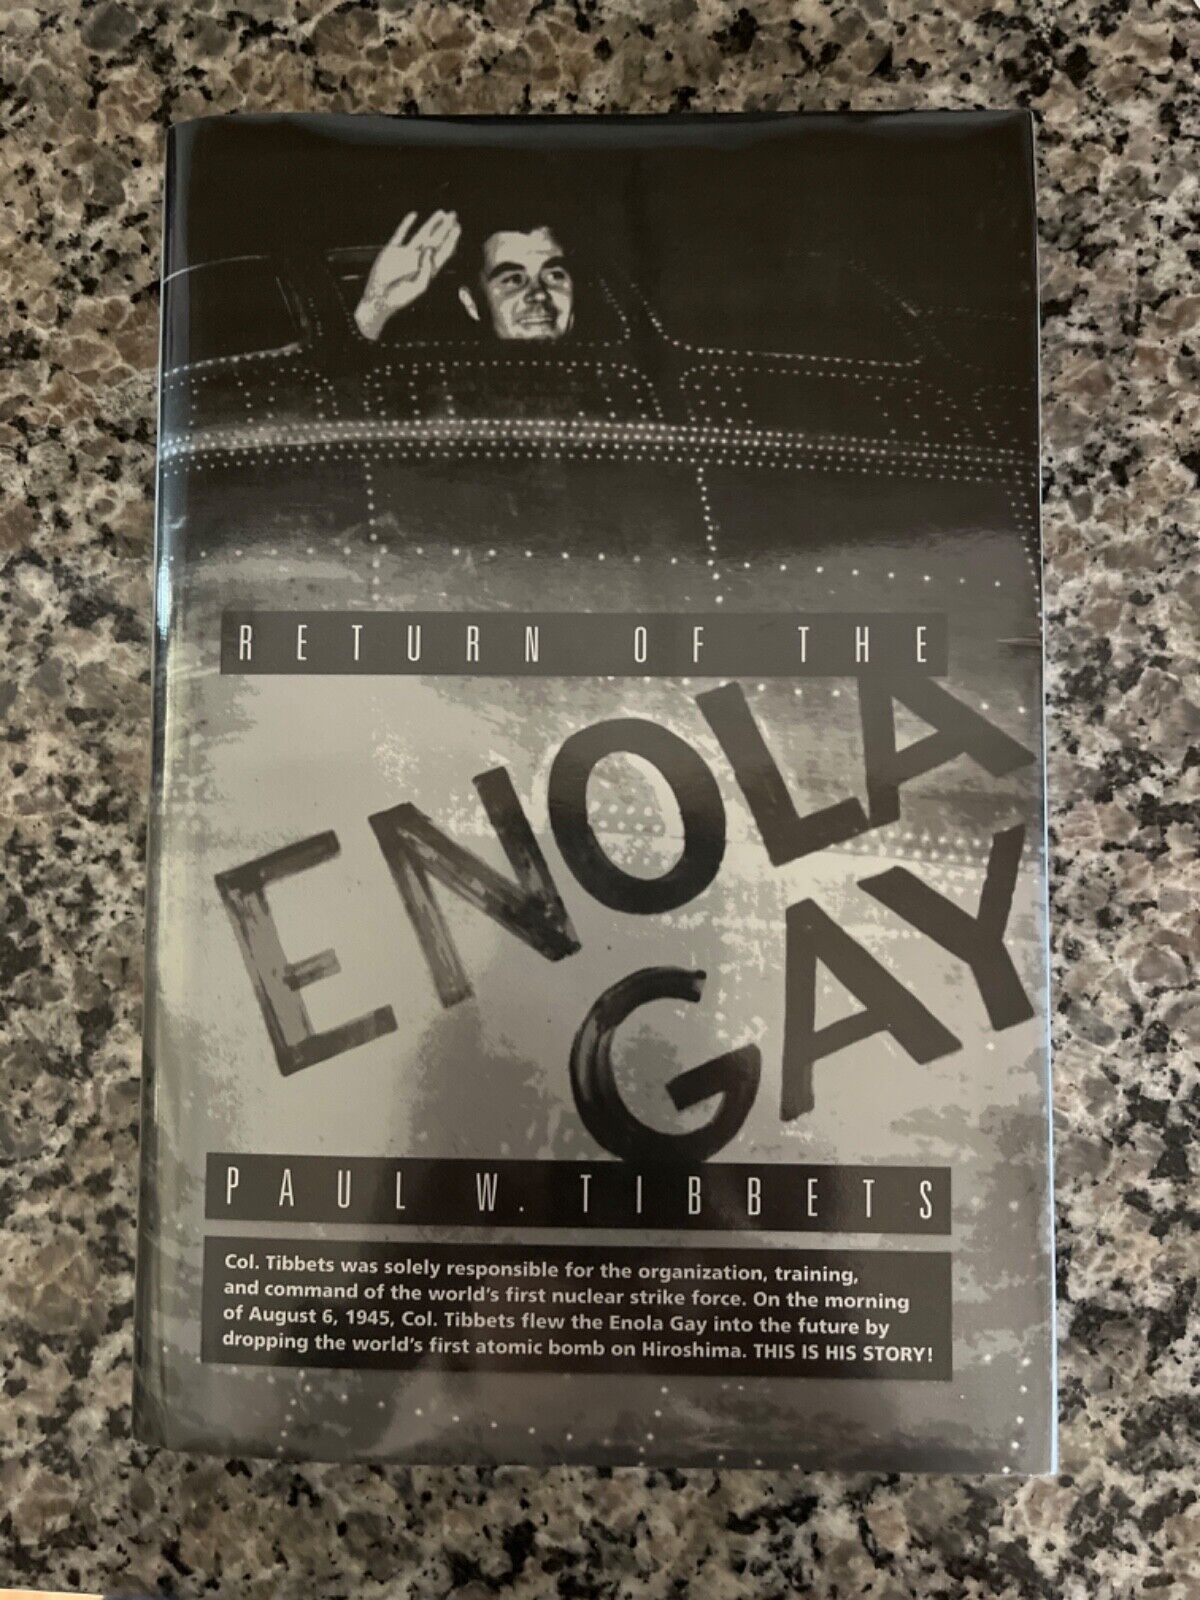 PAUL W. TIBBETS Signed by all 4, book 1236/1500 - Return of the Enola Gay